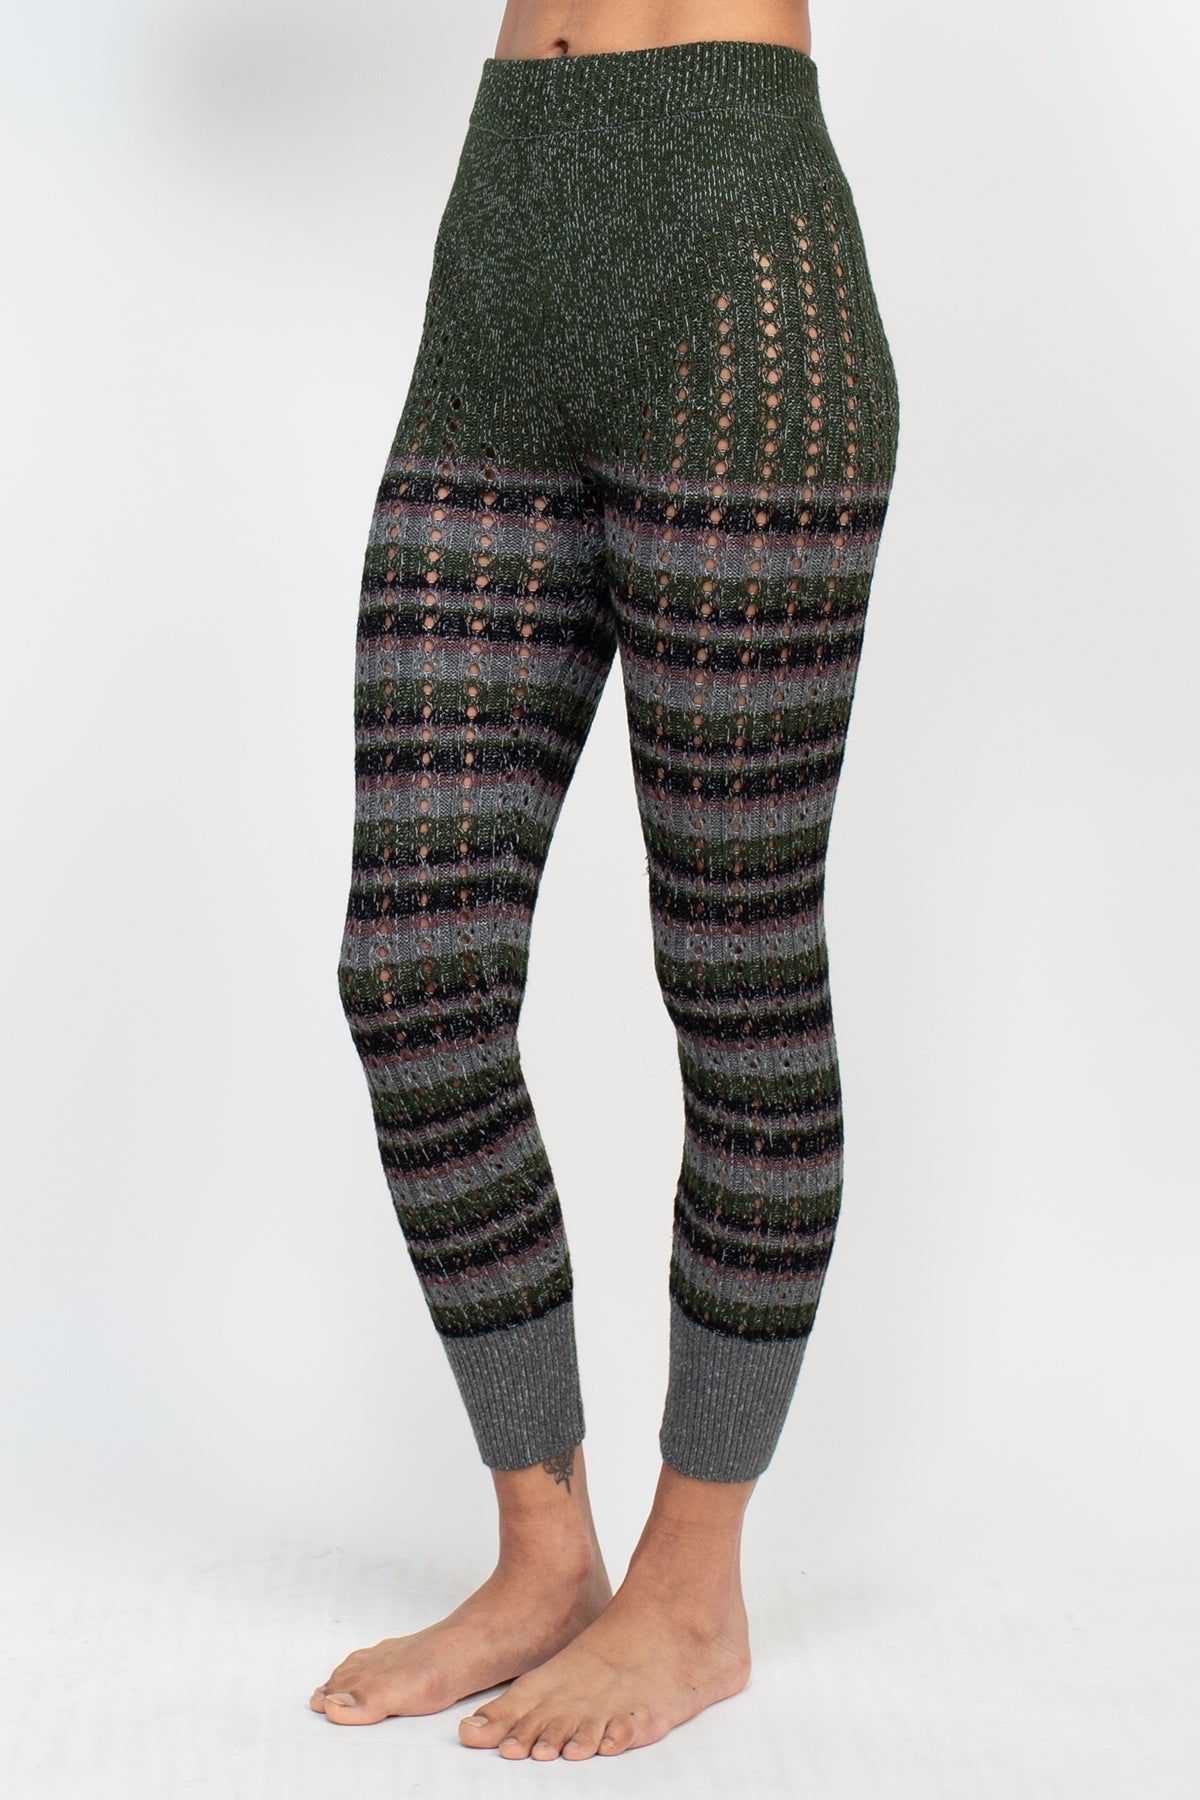 Soft and Stylish Lacy Knit Leggings - Perfect for Fall and Winter